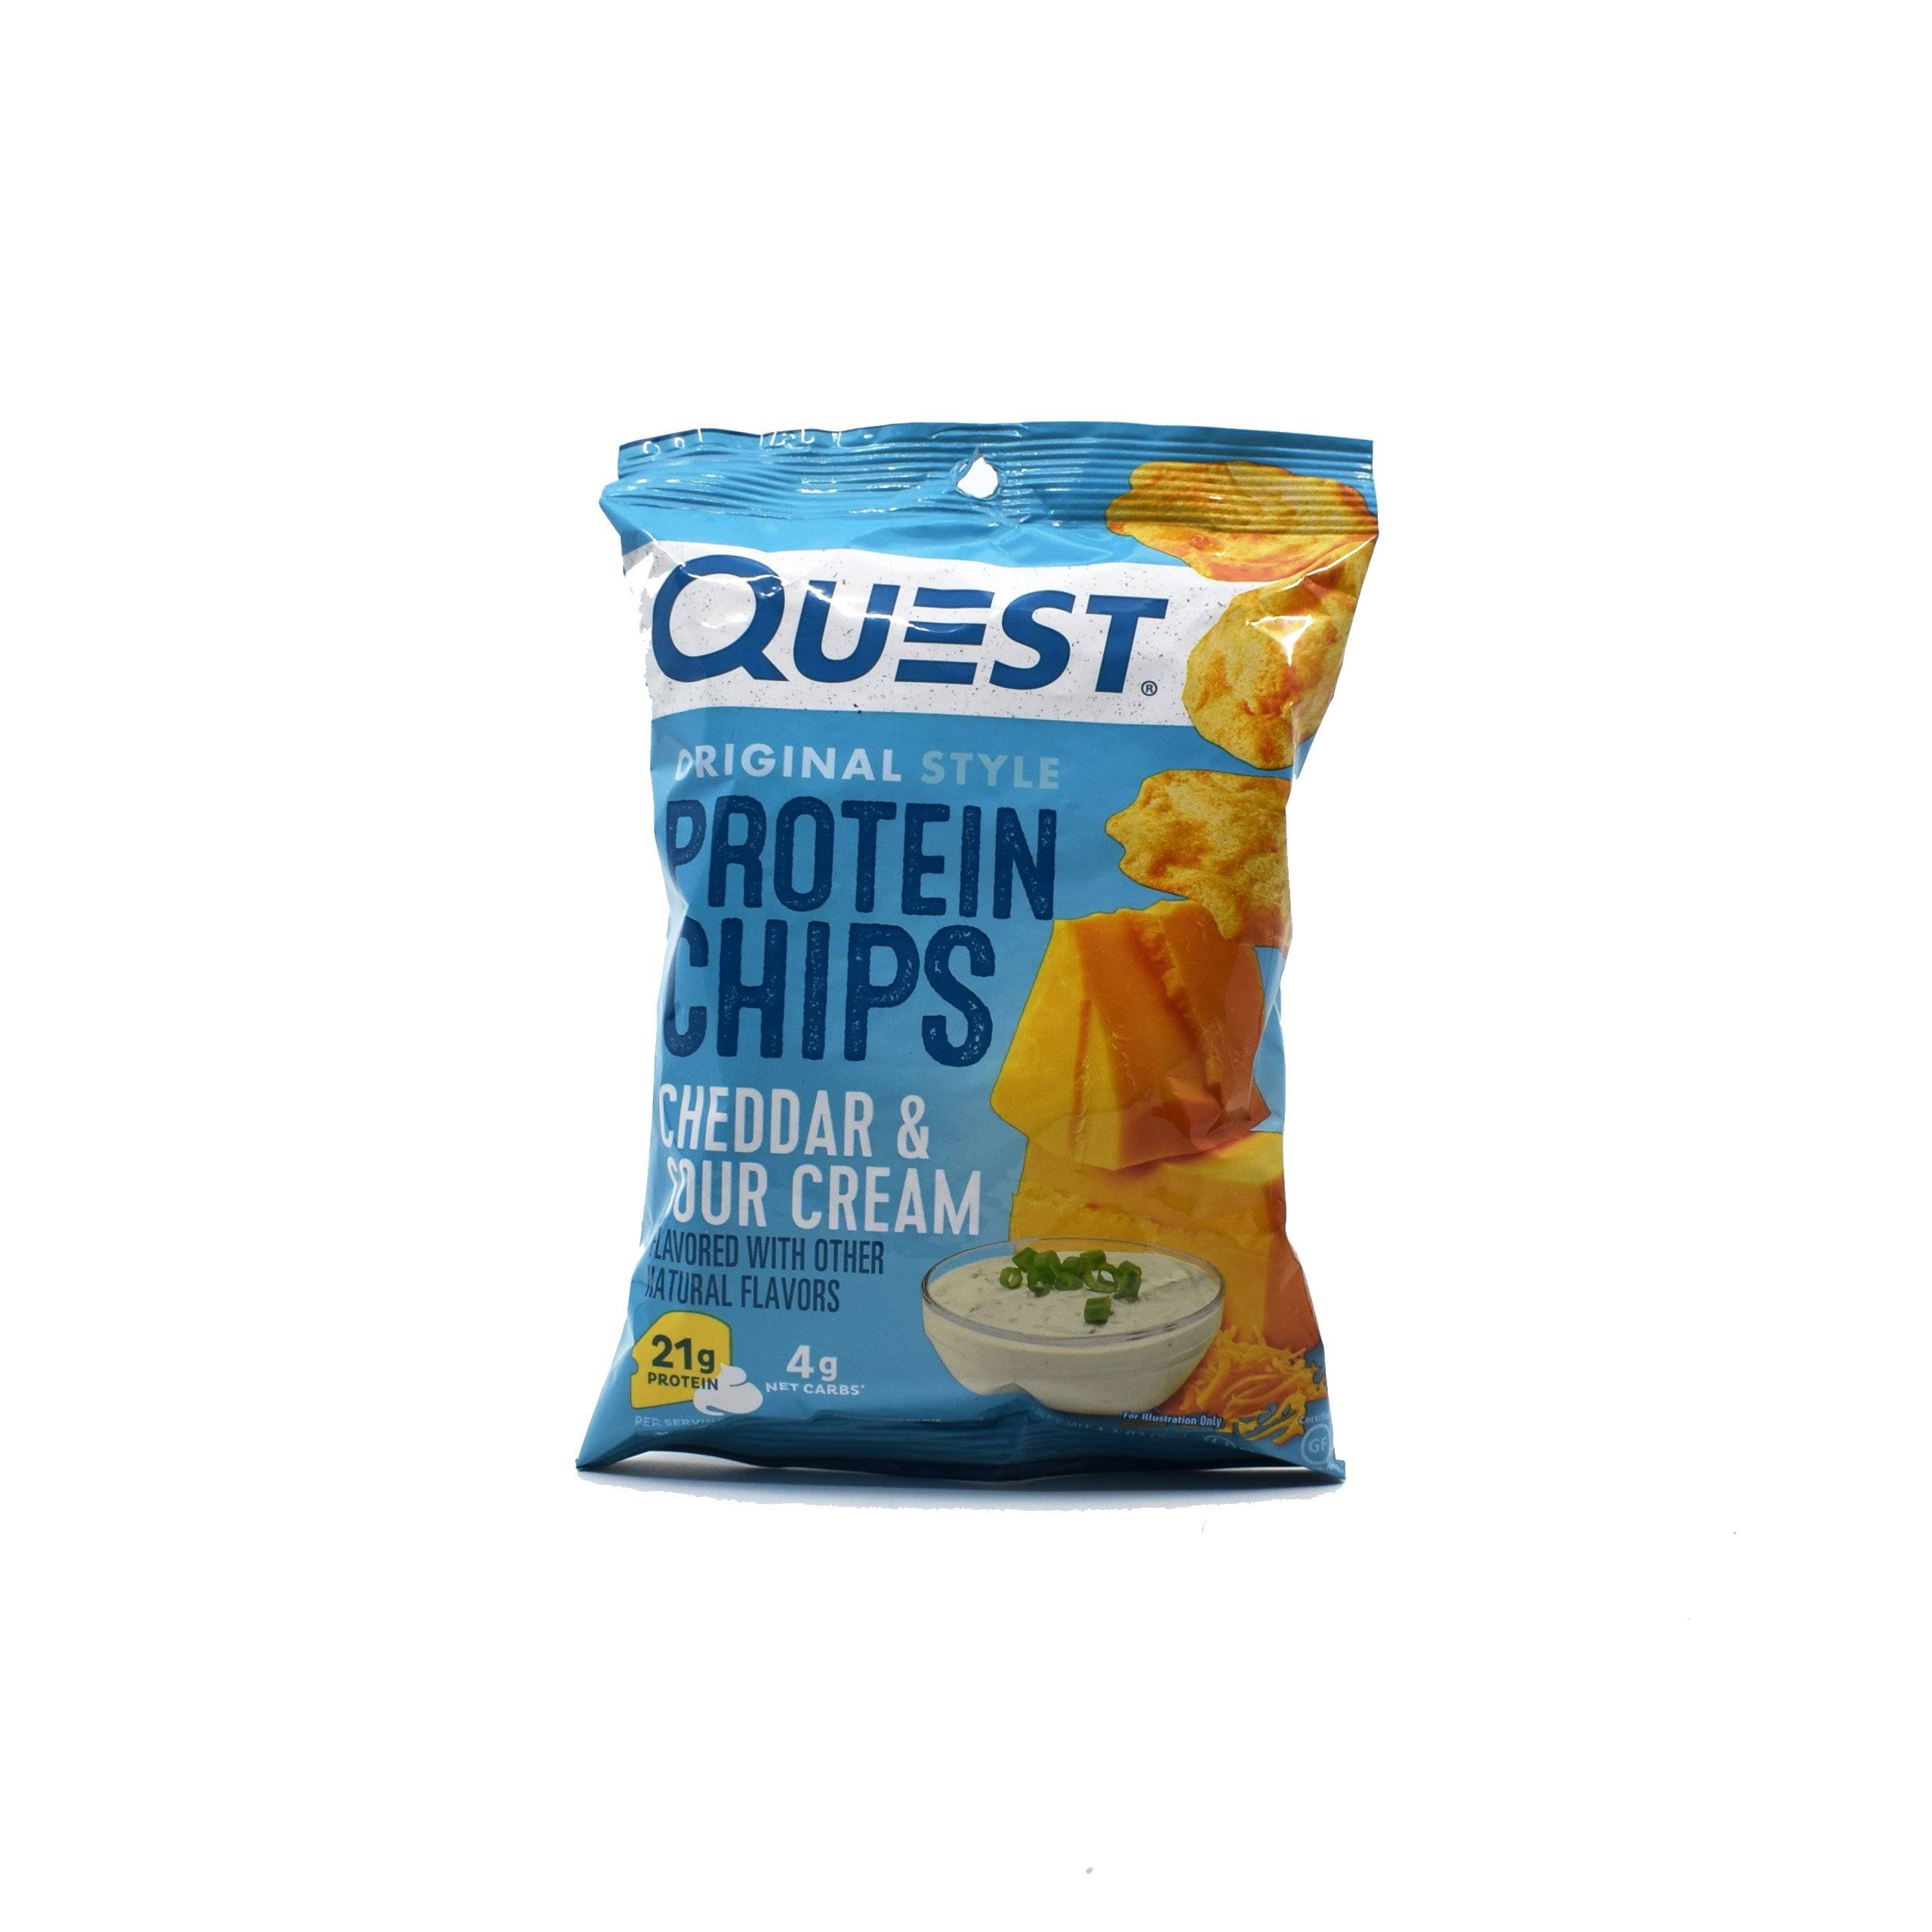 Quest Protein Chips - Cheddar and Sour Cream, 32g